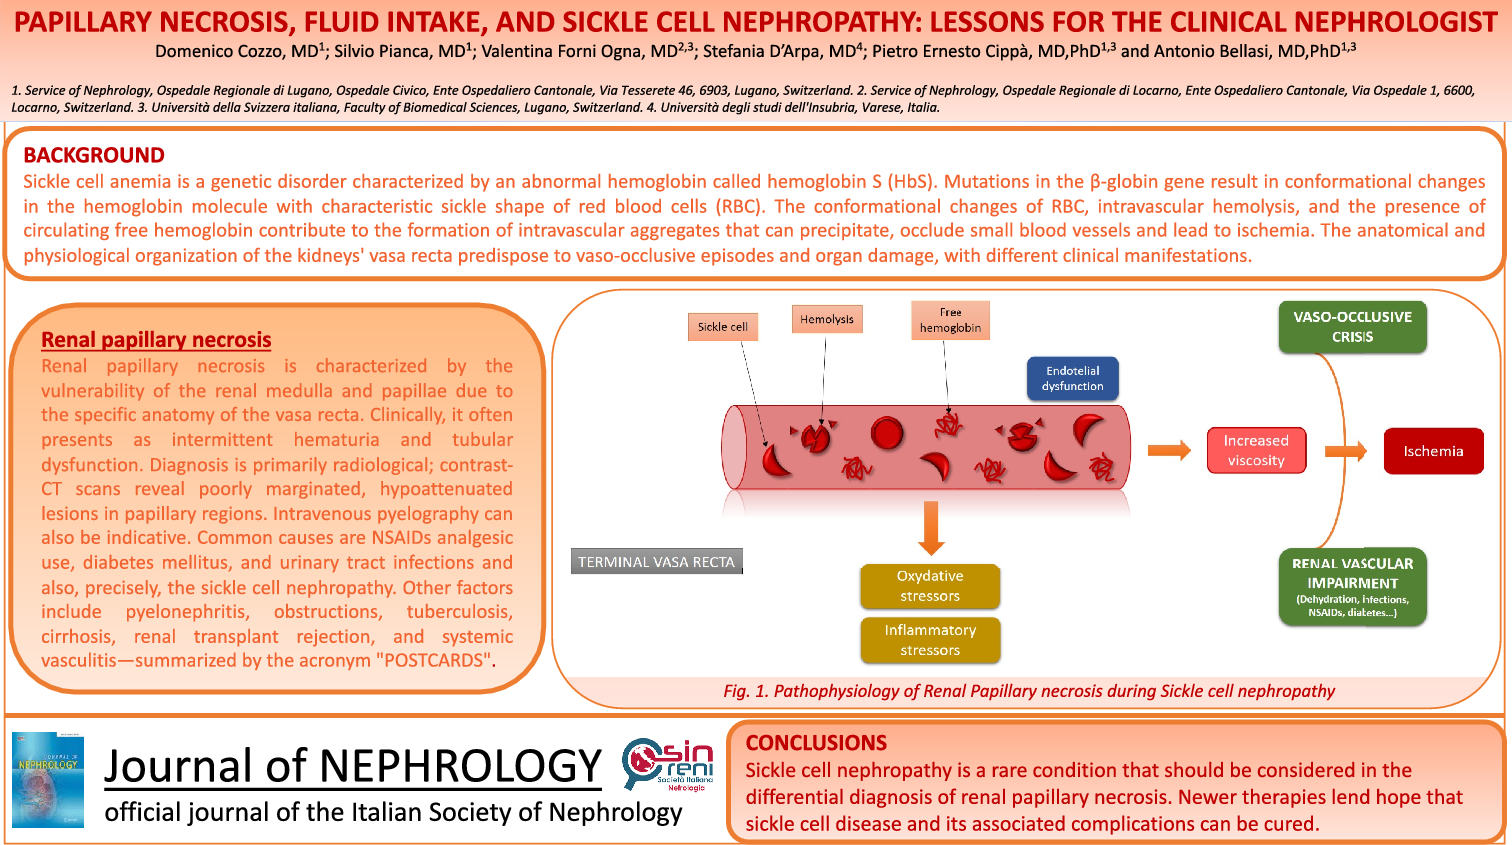 Papillary necrosis, fluid intake, and sickle cell nephropathy: lessons for the clinical nephrologist